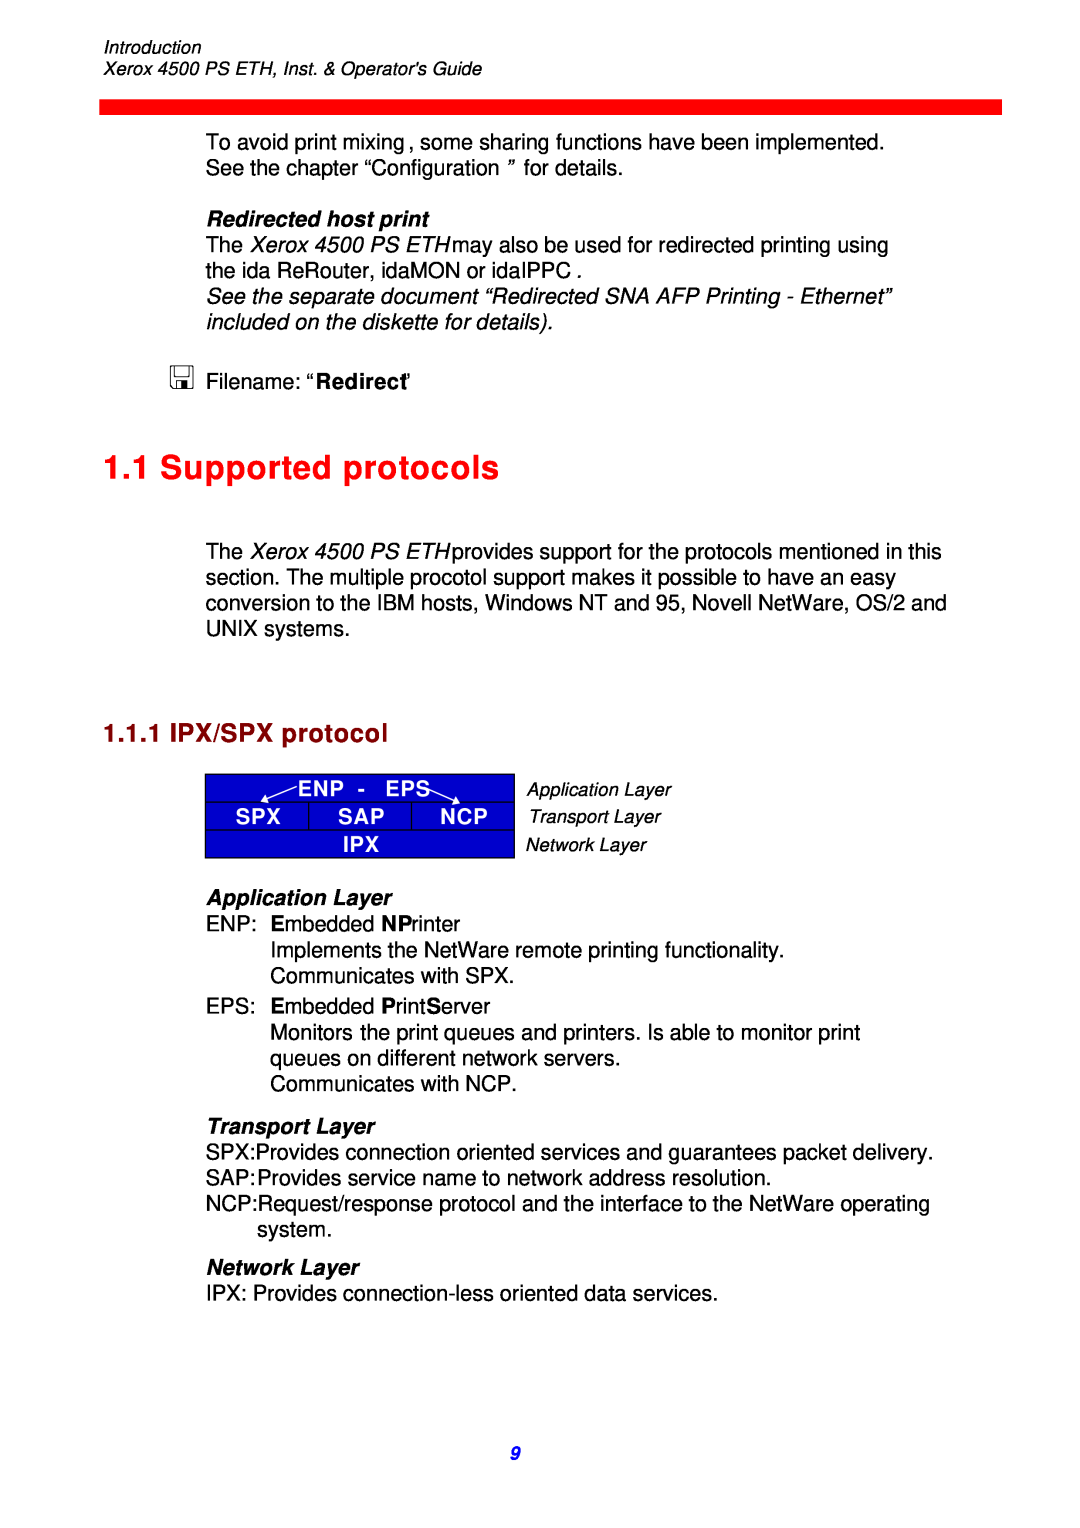 Xerox 4500 ps eth Supported protocols, 1.1.1 IPX/SPX protocol, Redirected host print, Application Layer, Transport Layer 